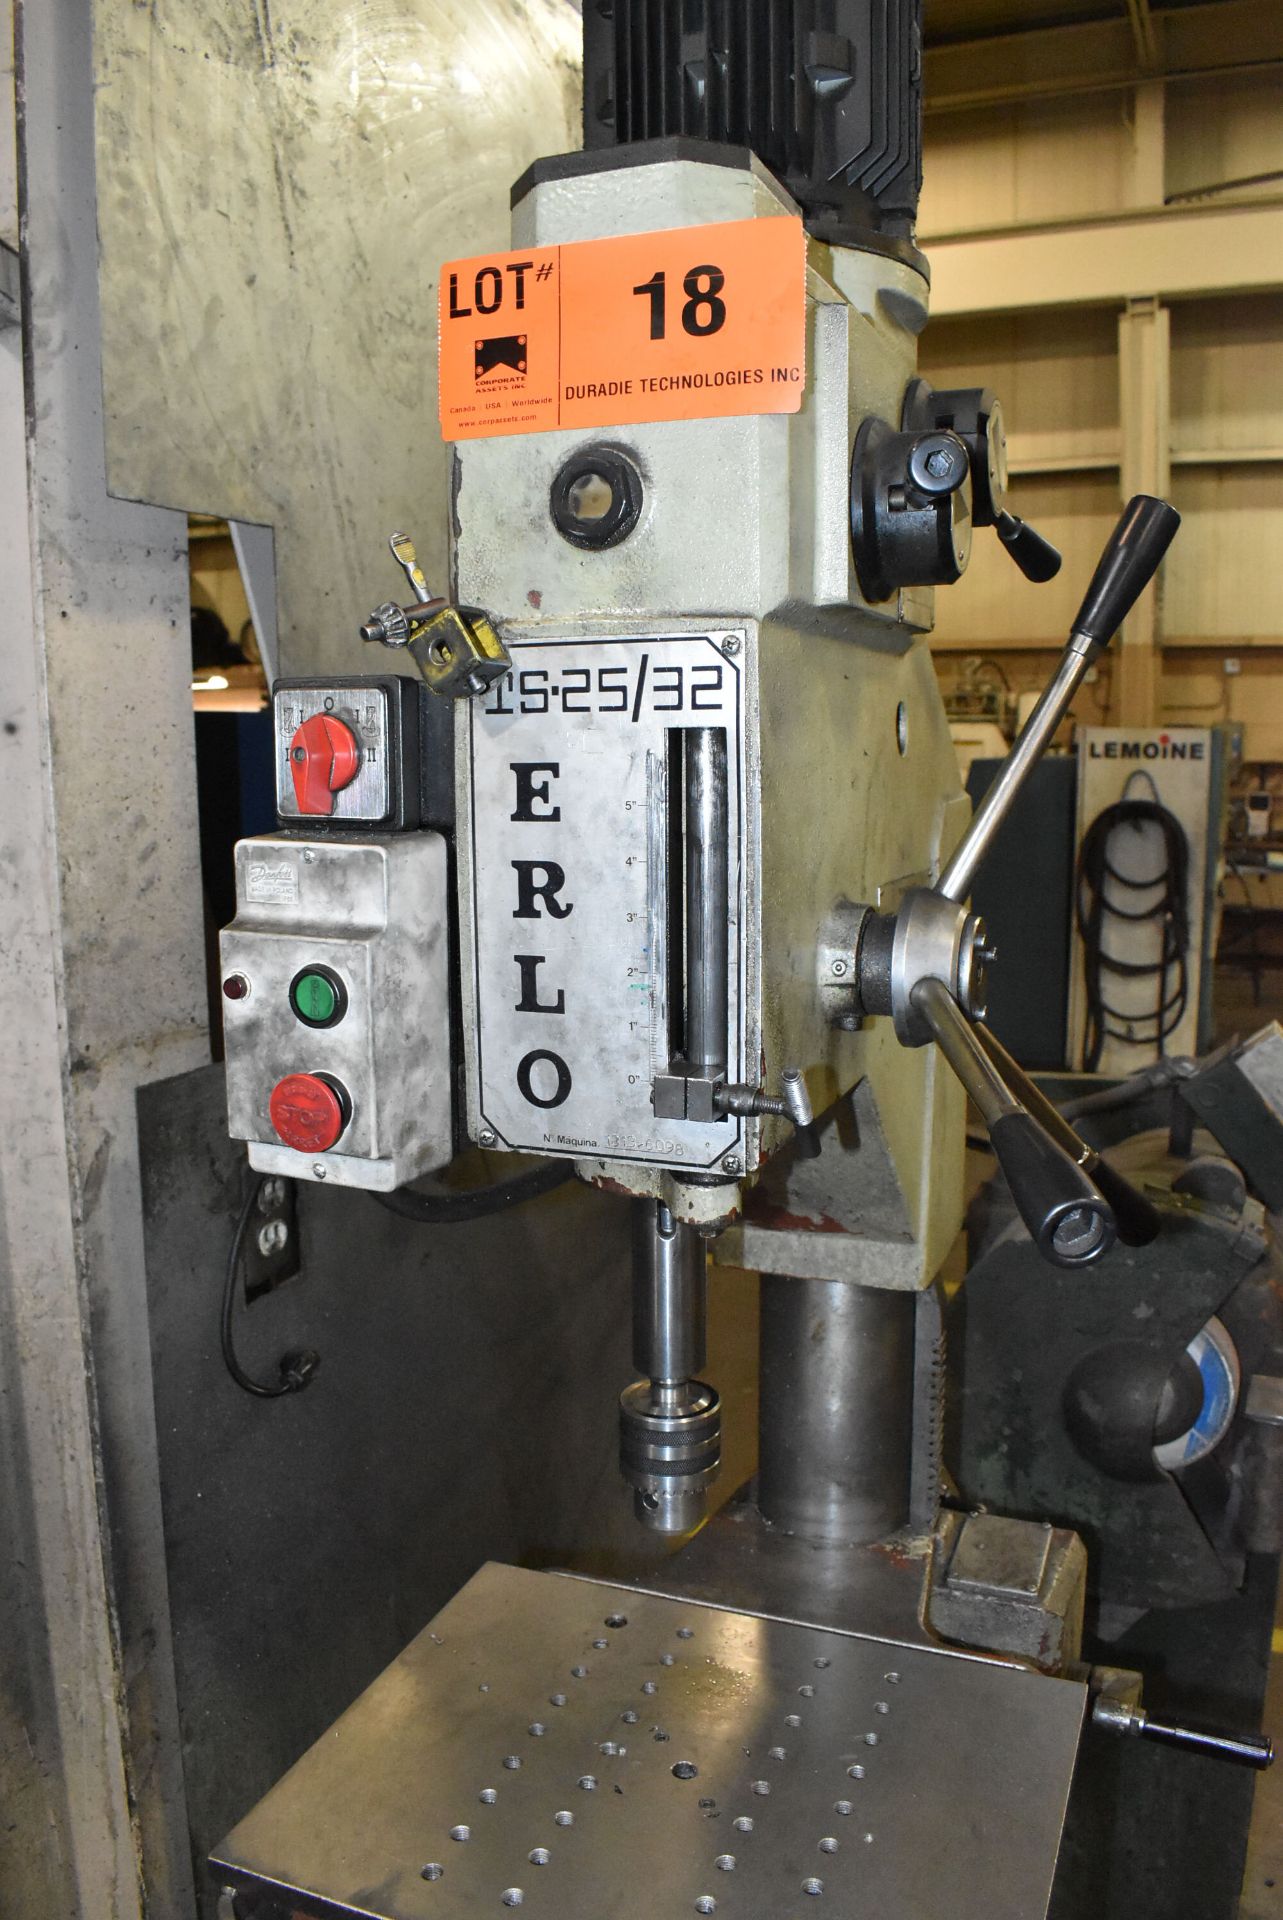 ERCO TS-25/32 GEAR HEAD DRILL WITH 13.5" X 16" TABLE, 12" THROAT, SPEEDS TO 2520 RPM, S/N 1813- - Image 2 of 5